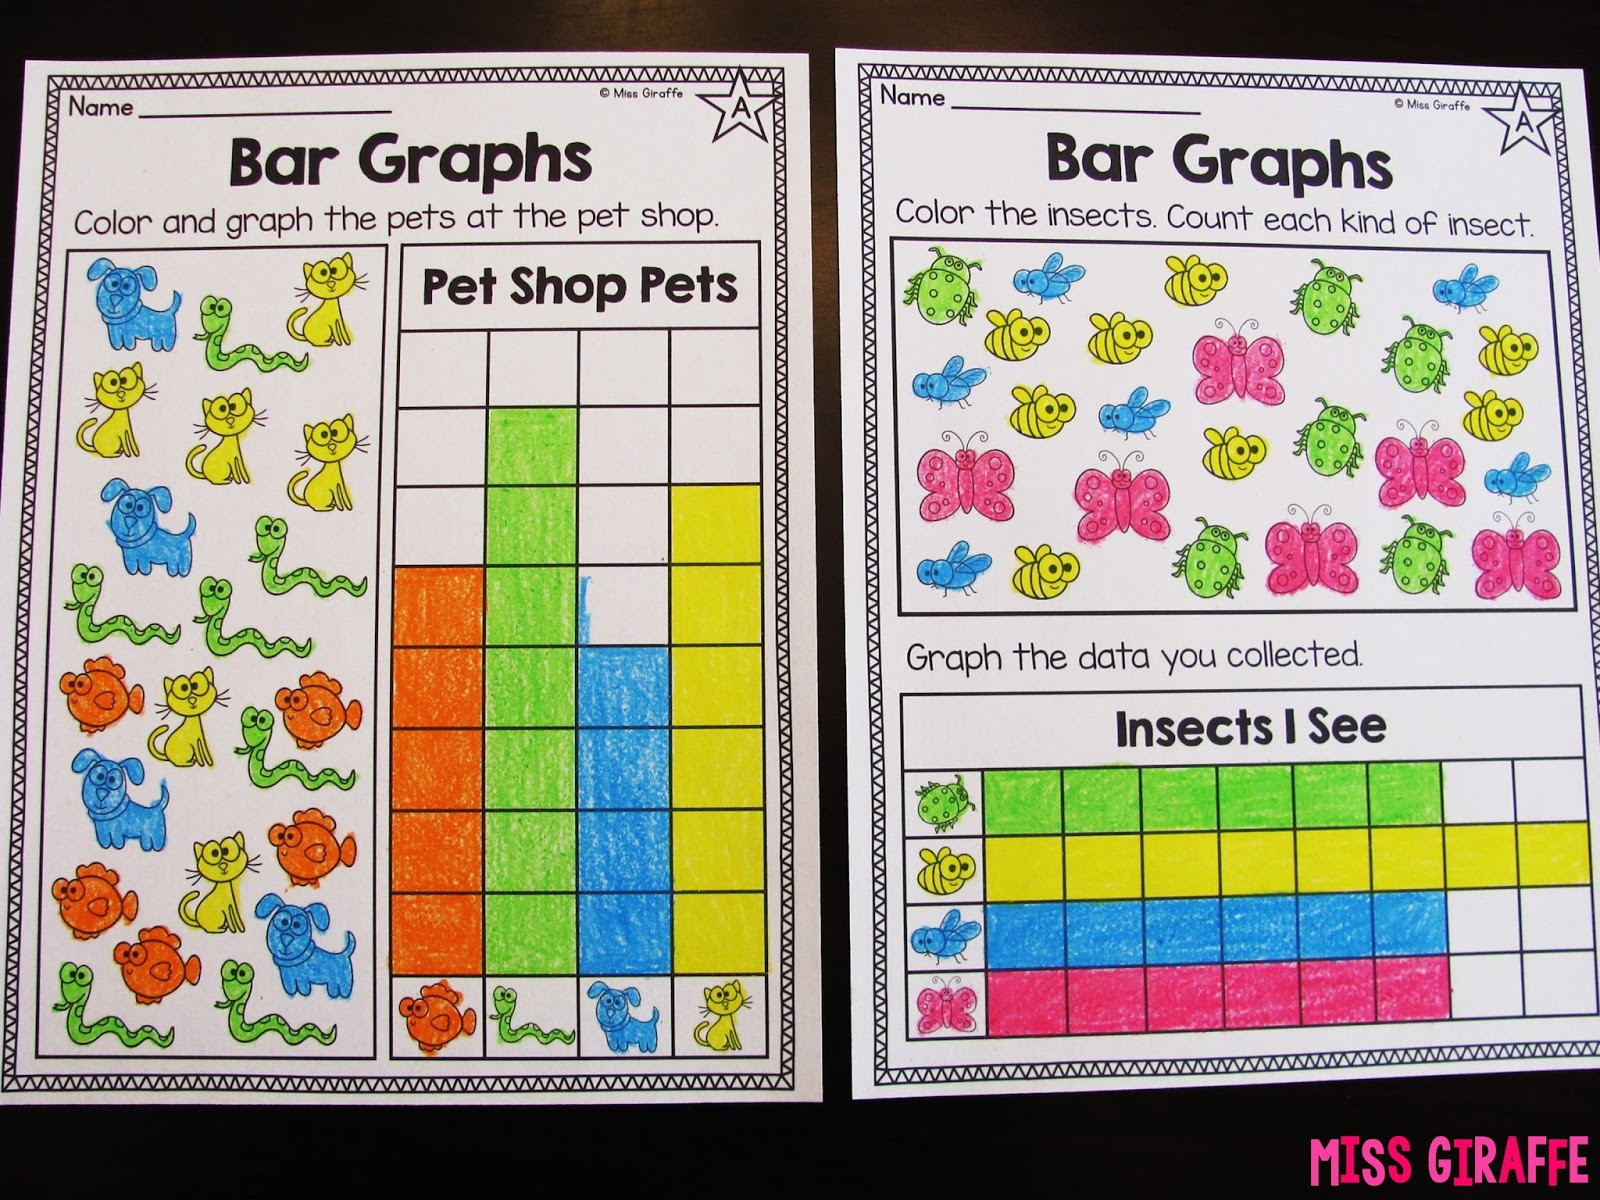 Free Math Worksheets First Grade 1 Comparing Numbers